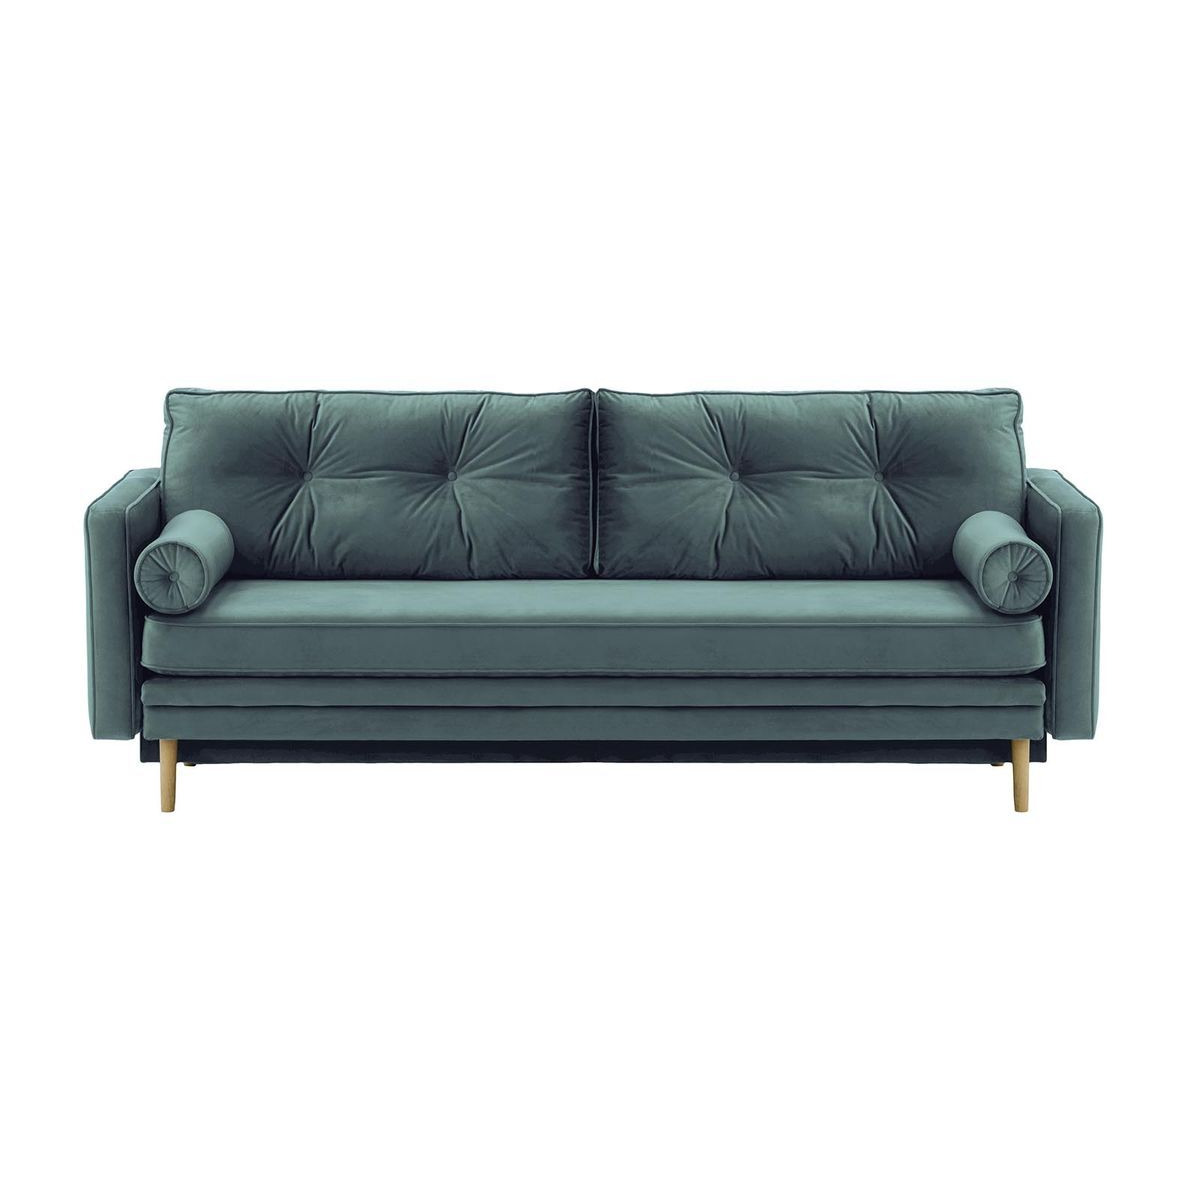 Mossa Sofa Bed with Storage, dirty blue, Leg colour: wax black - image 1